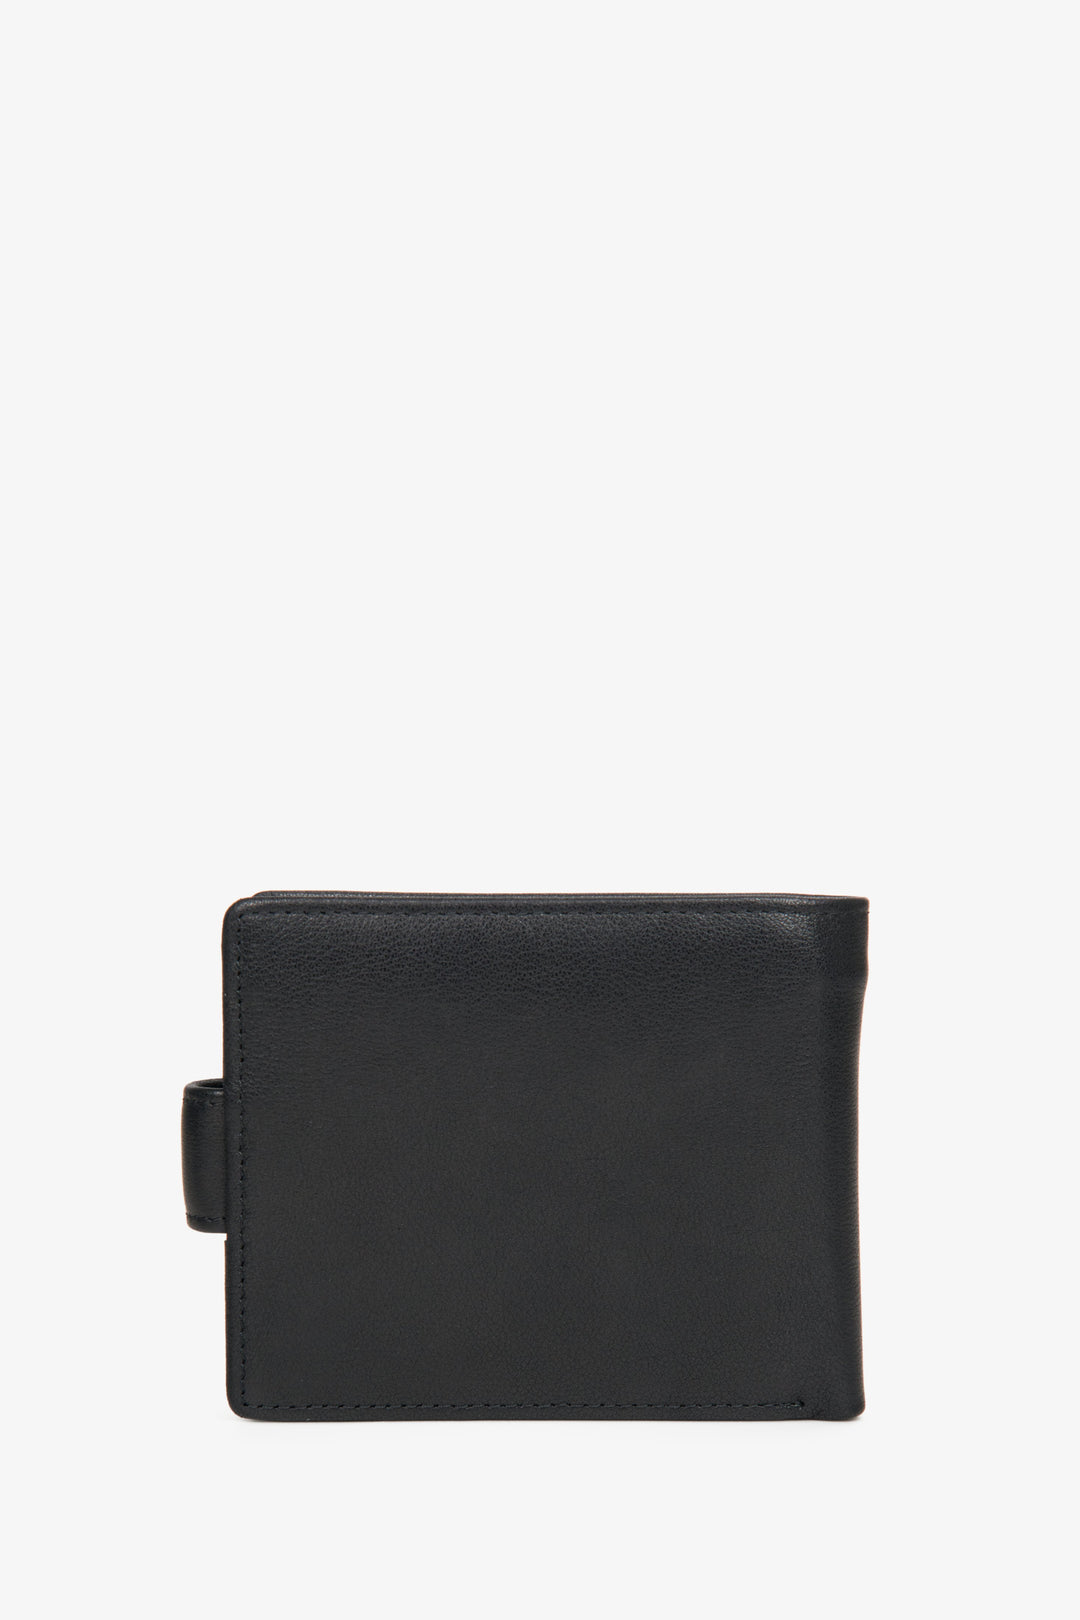 The back view of the black Estro men's wallet with buckle.